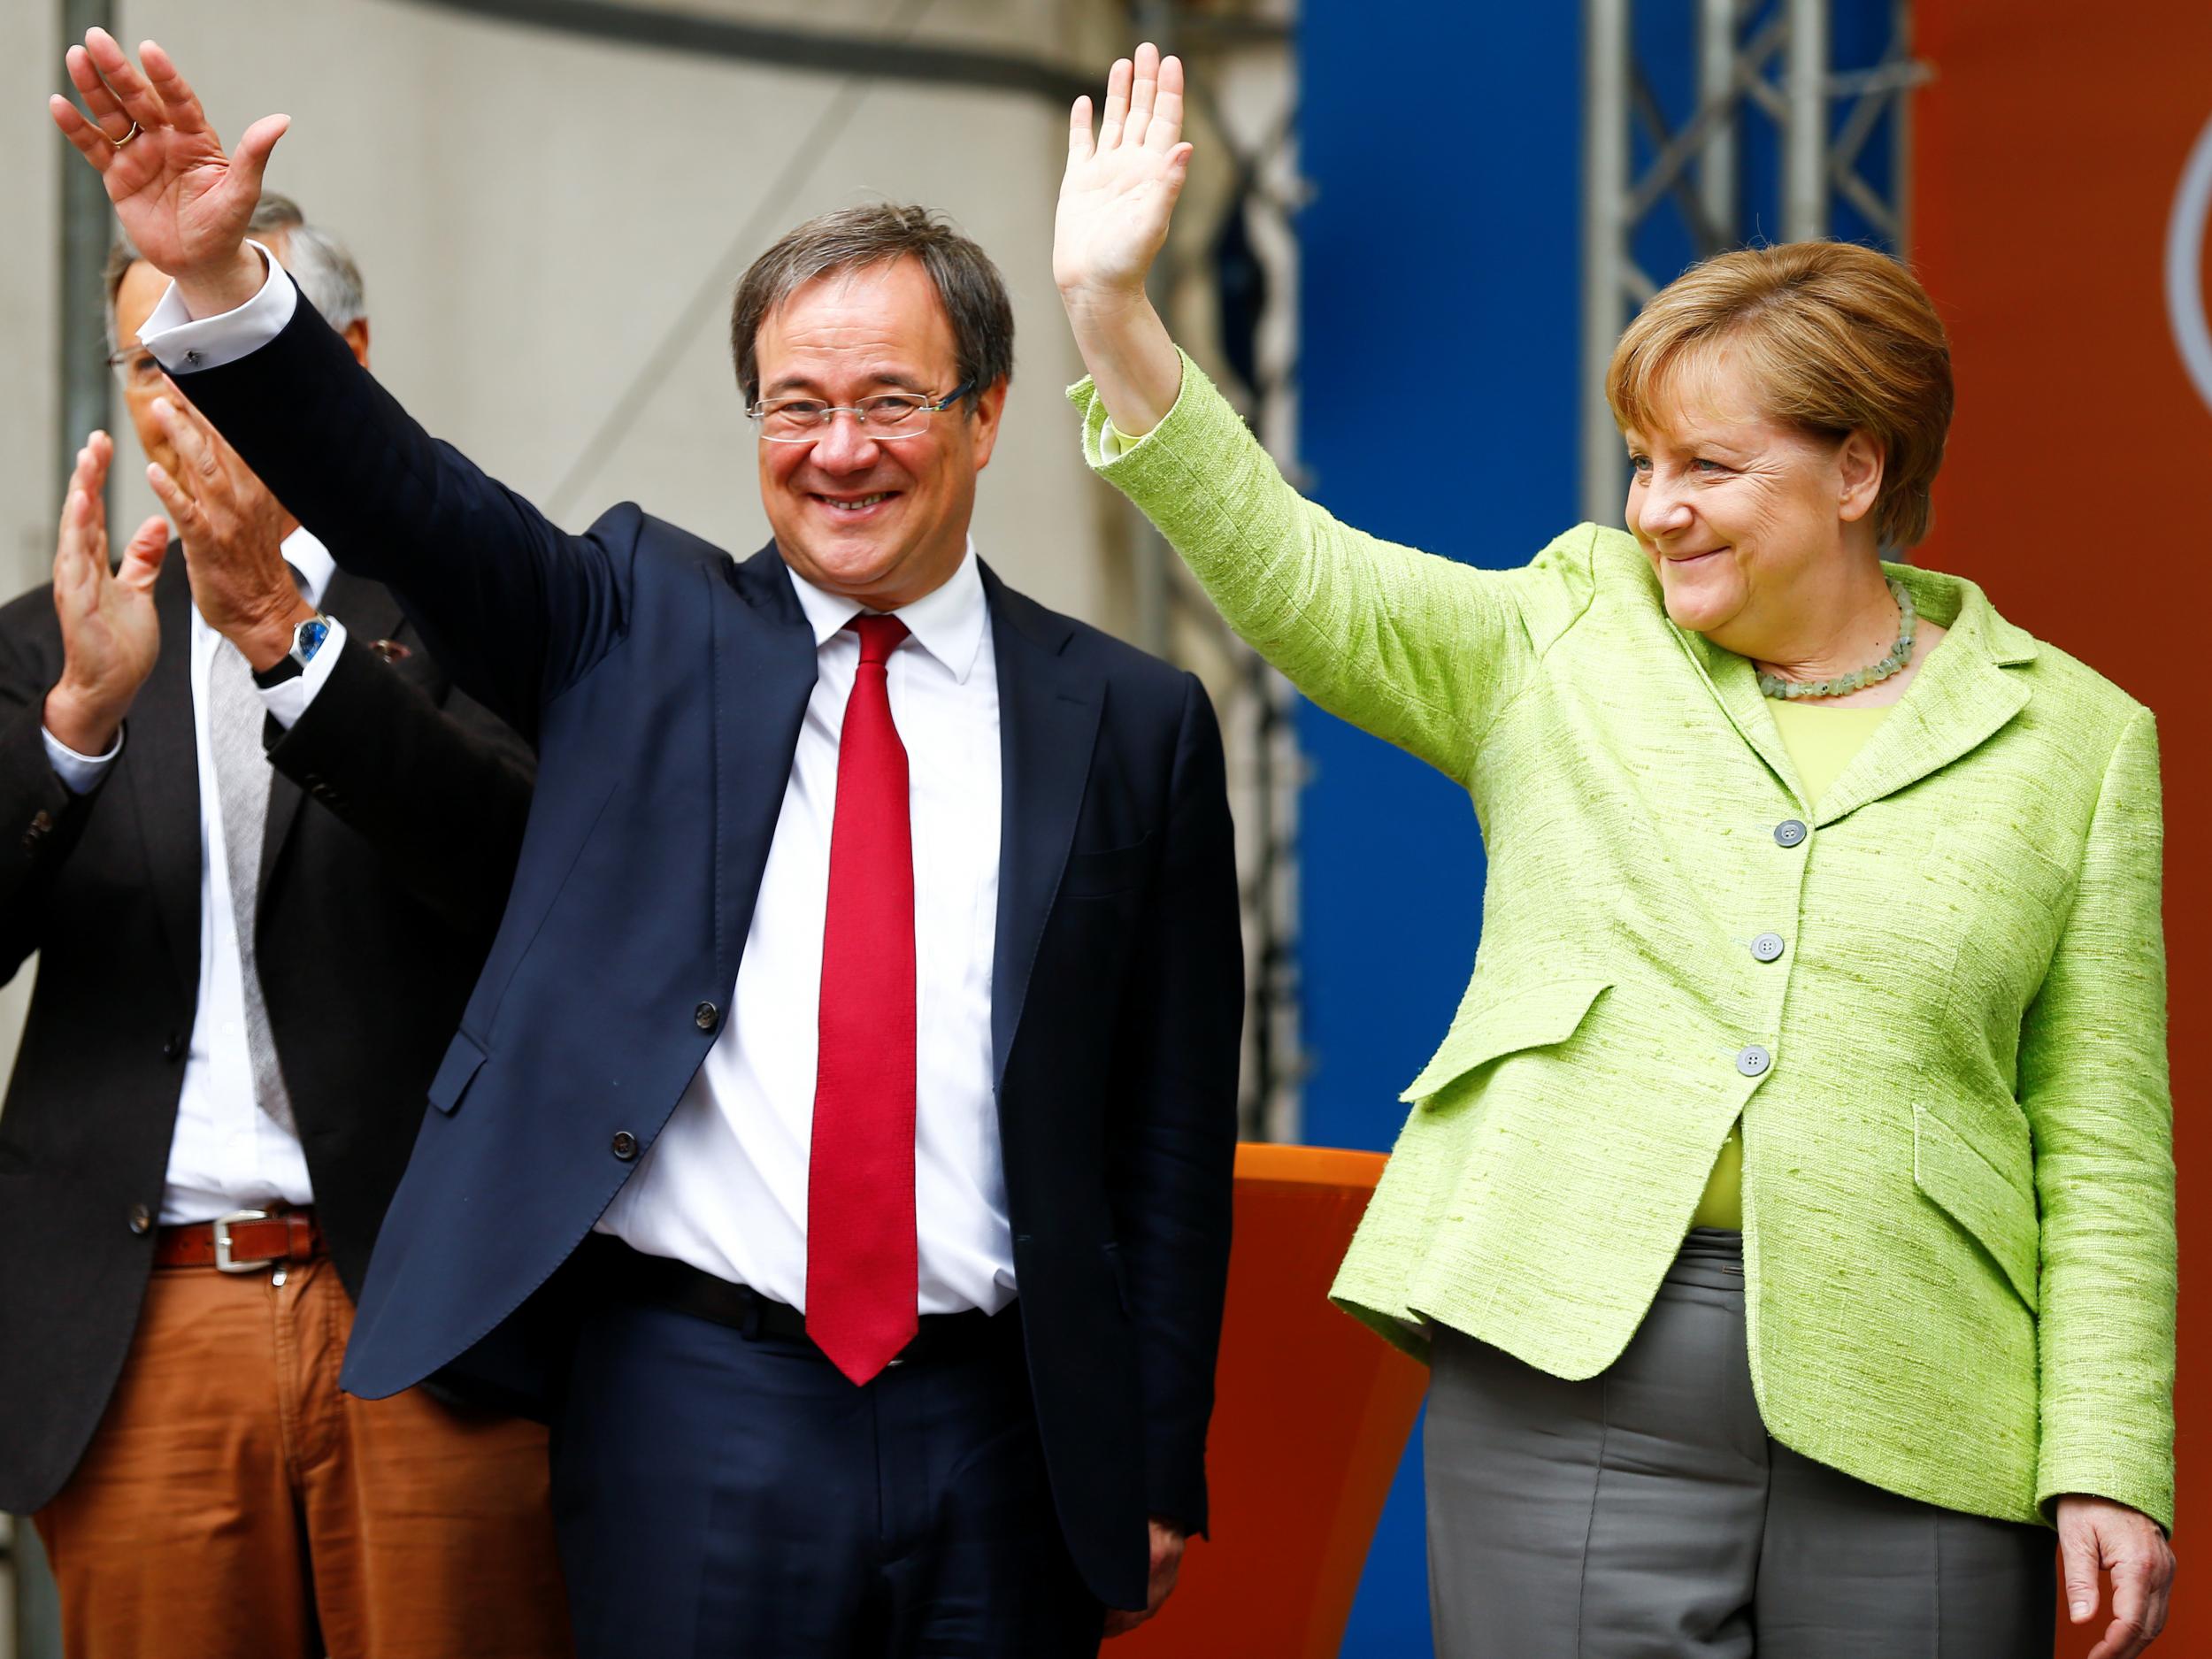 Winning Christian Democratic Union candidate Armin Laschet with German Chancellor Angela Merkel at an election rally in Aachen on 13 May 2017